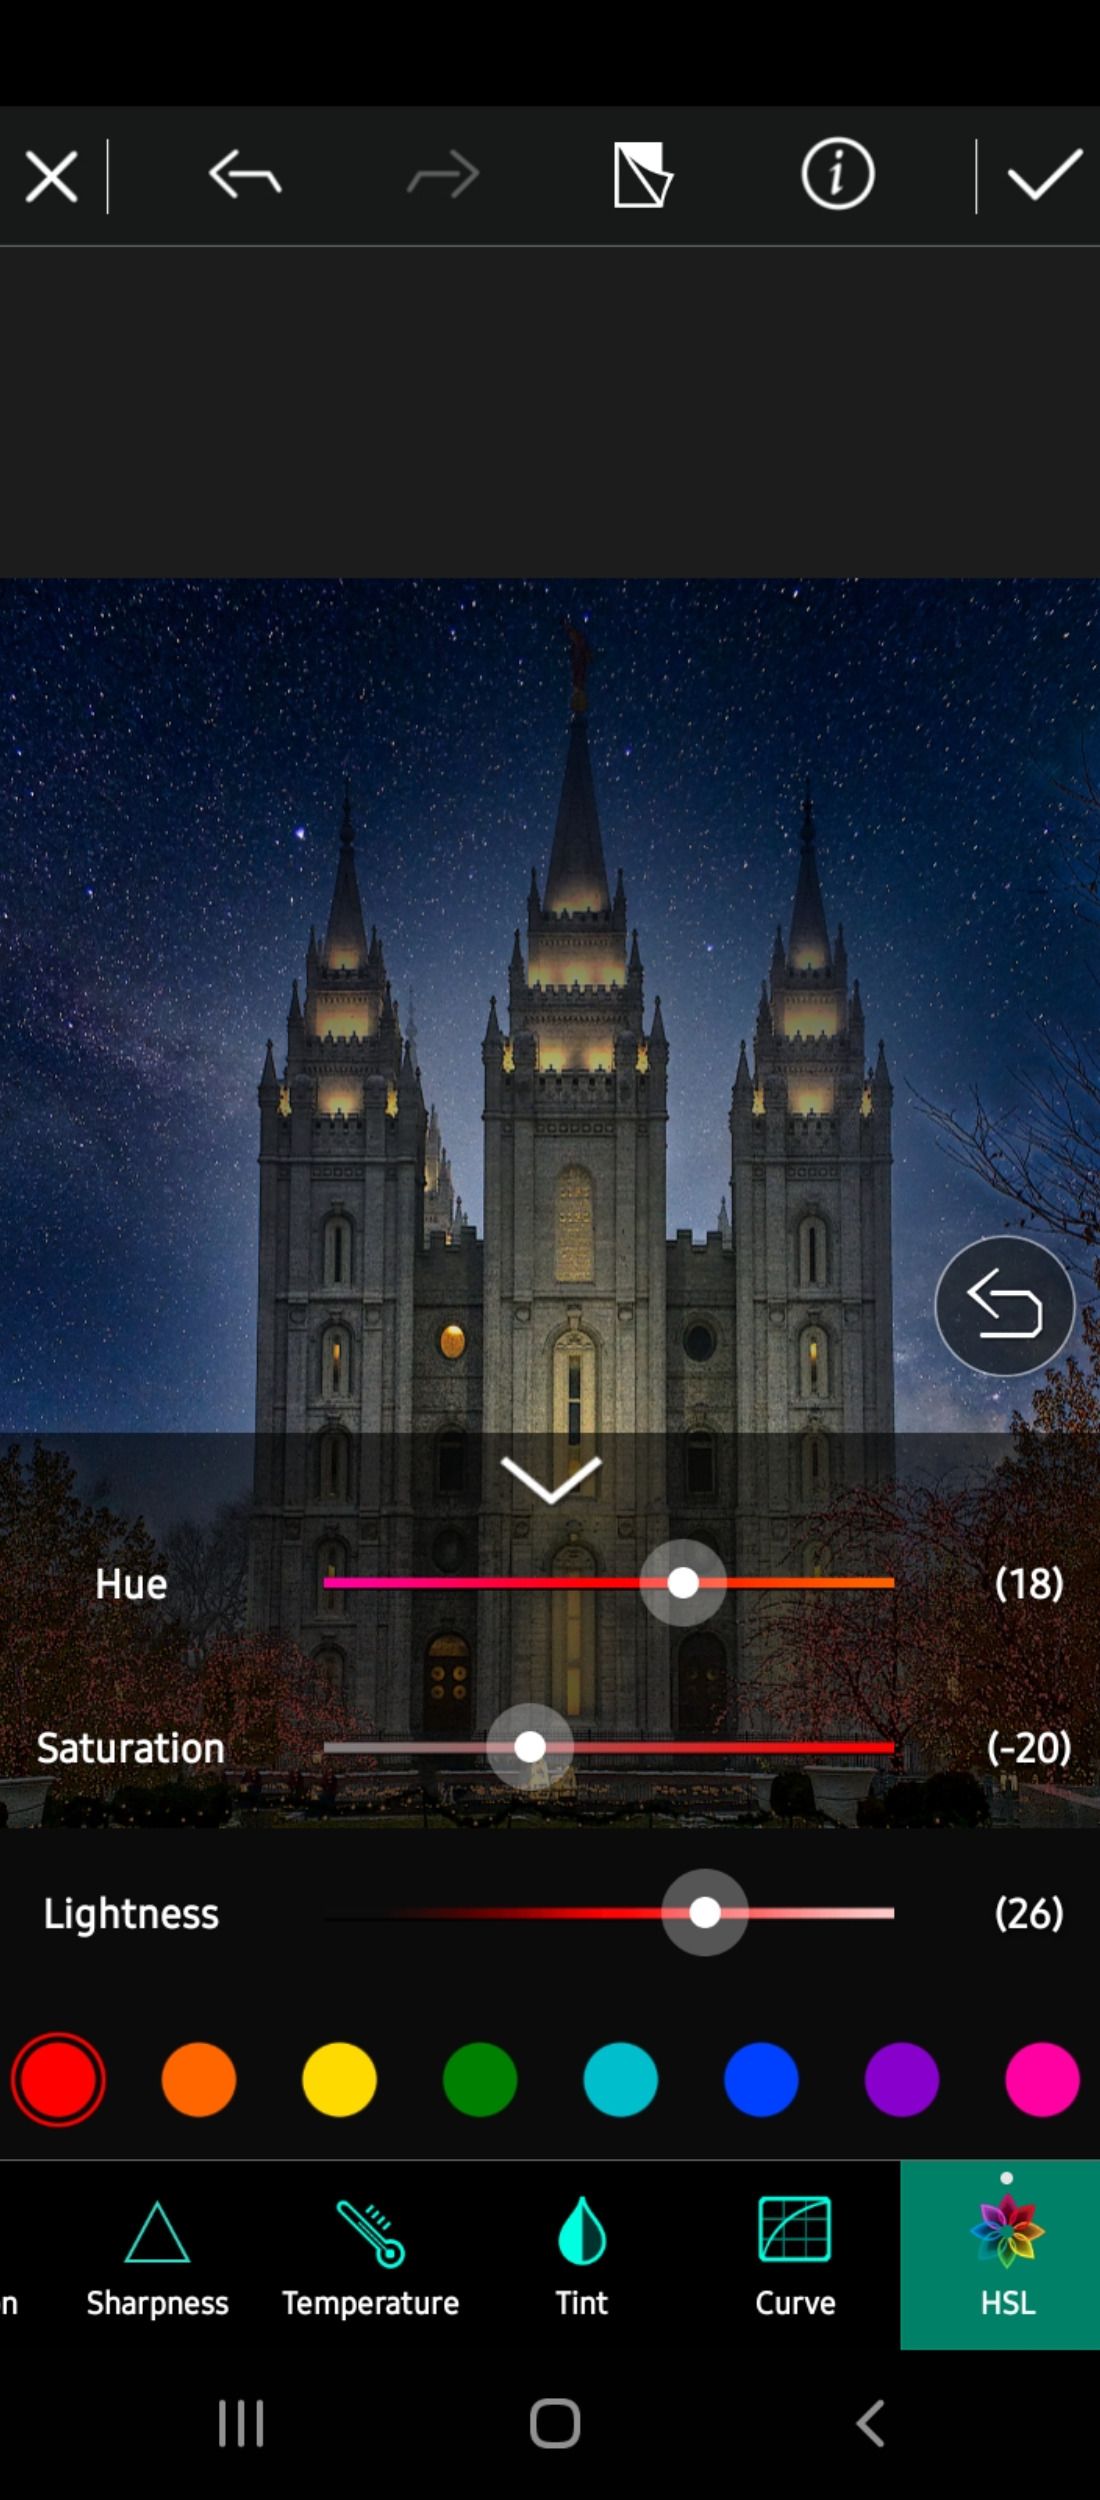 HSL settings in PhotoDirector